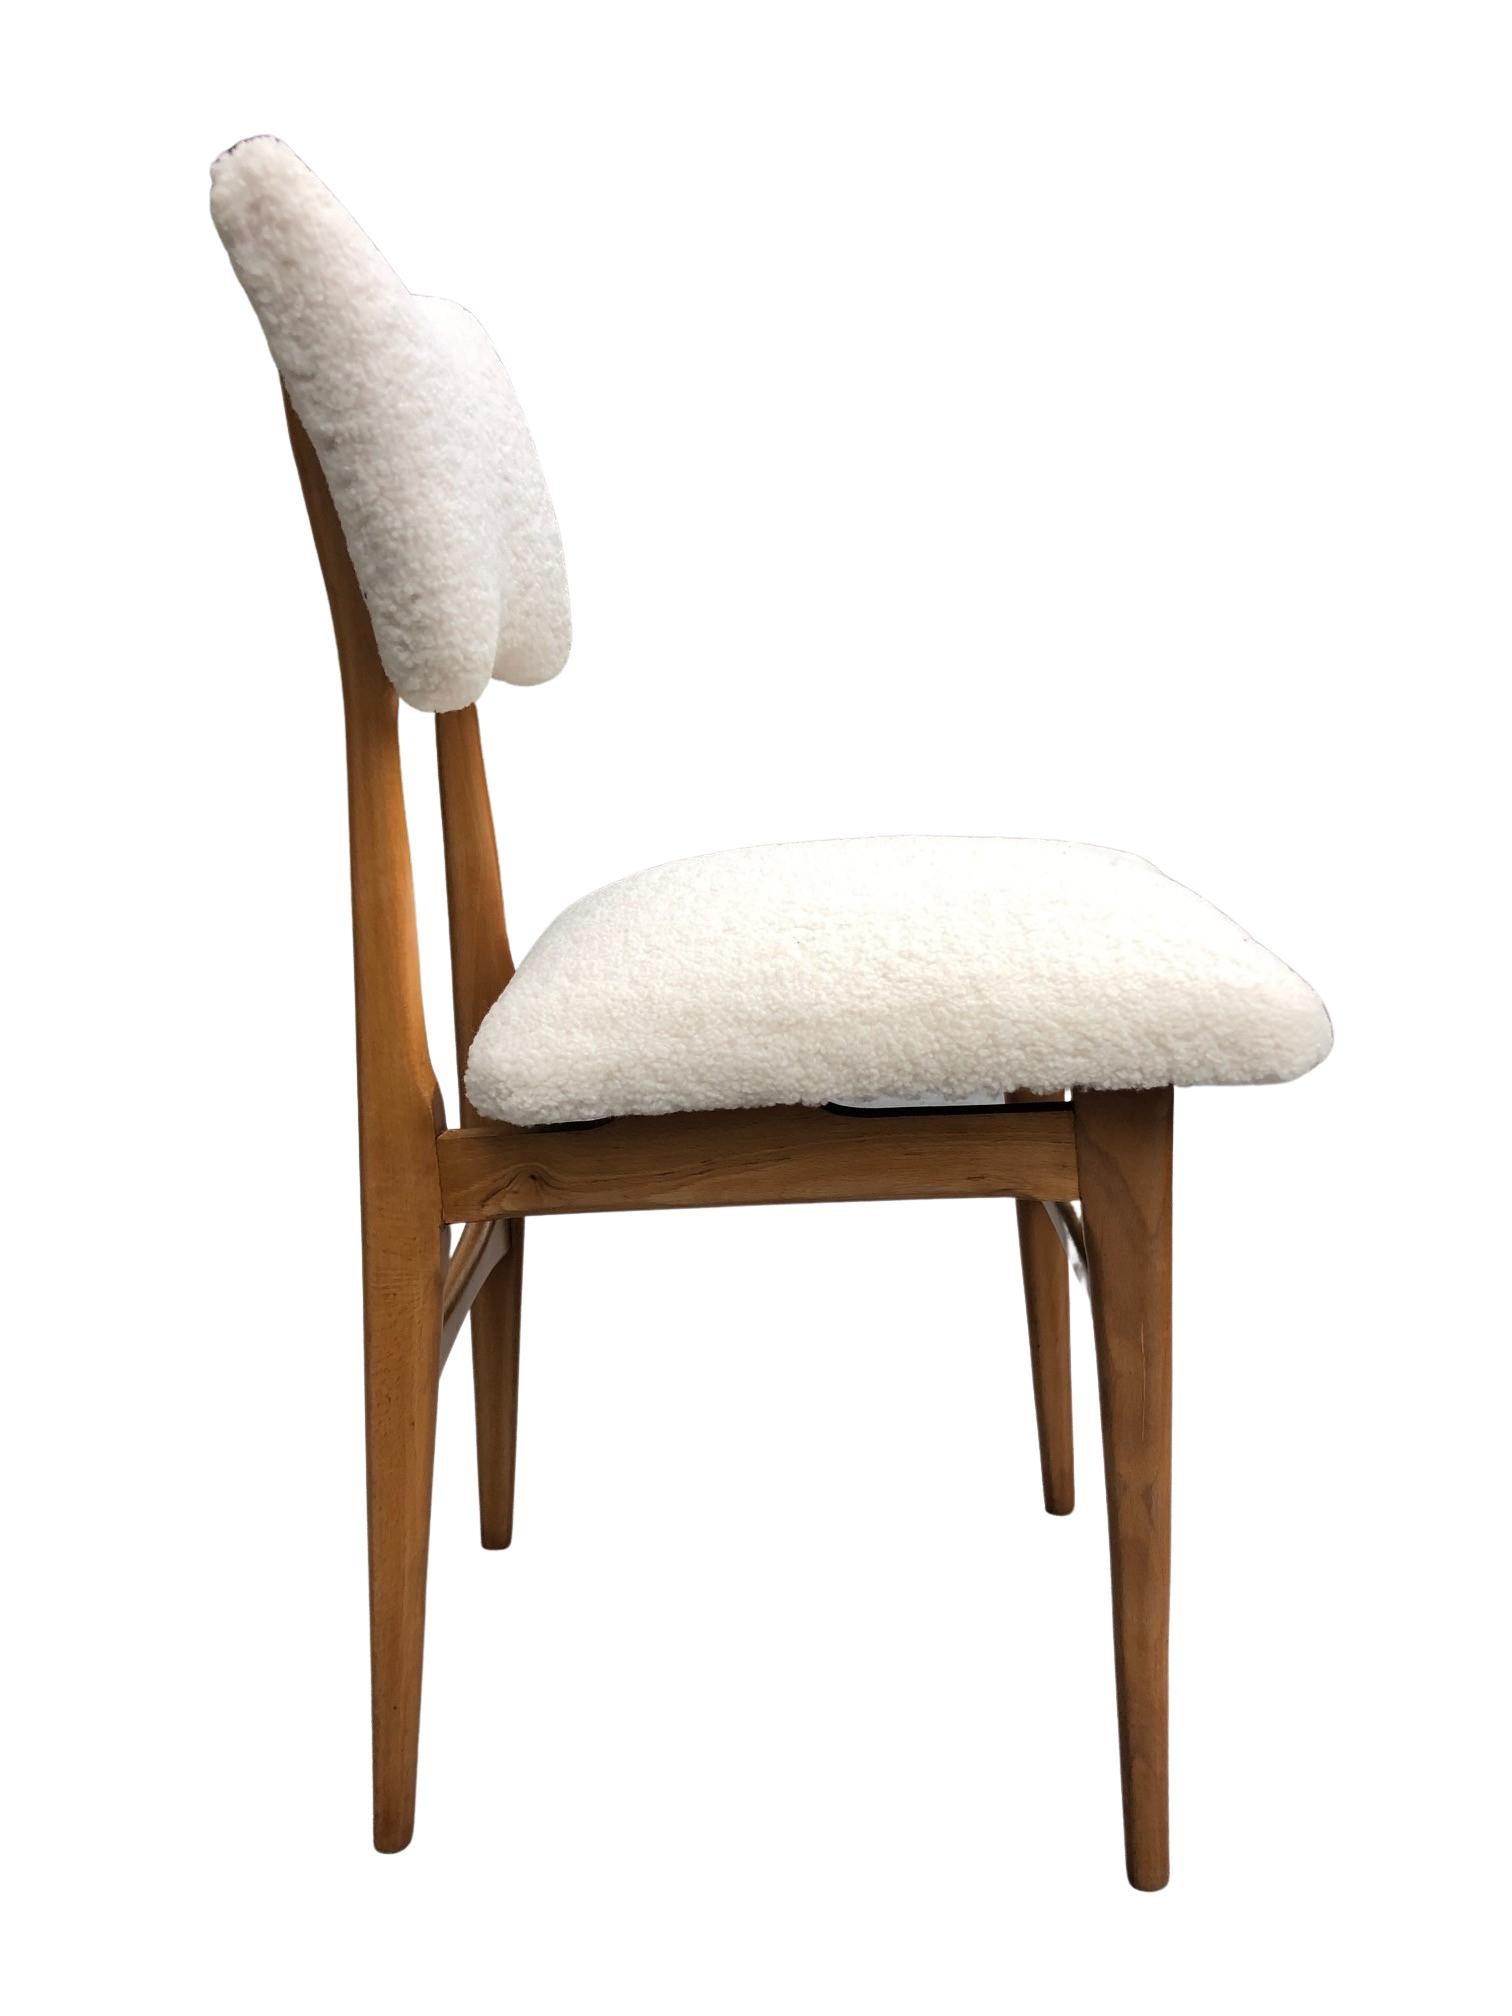 Midcentury Cream Bouclé and Wood Dining Chair, Europe, 1960s For Sale 5